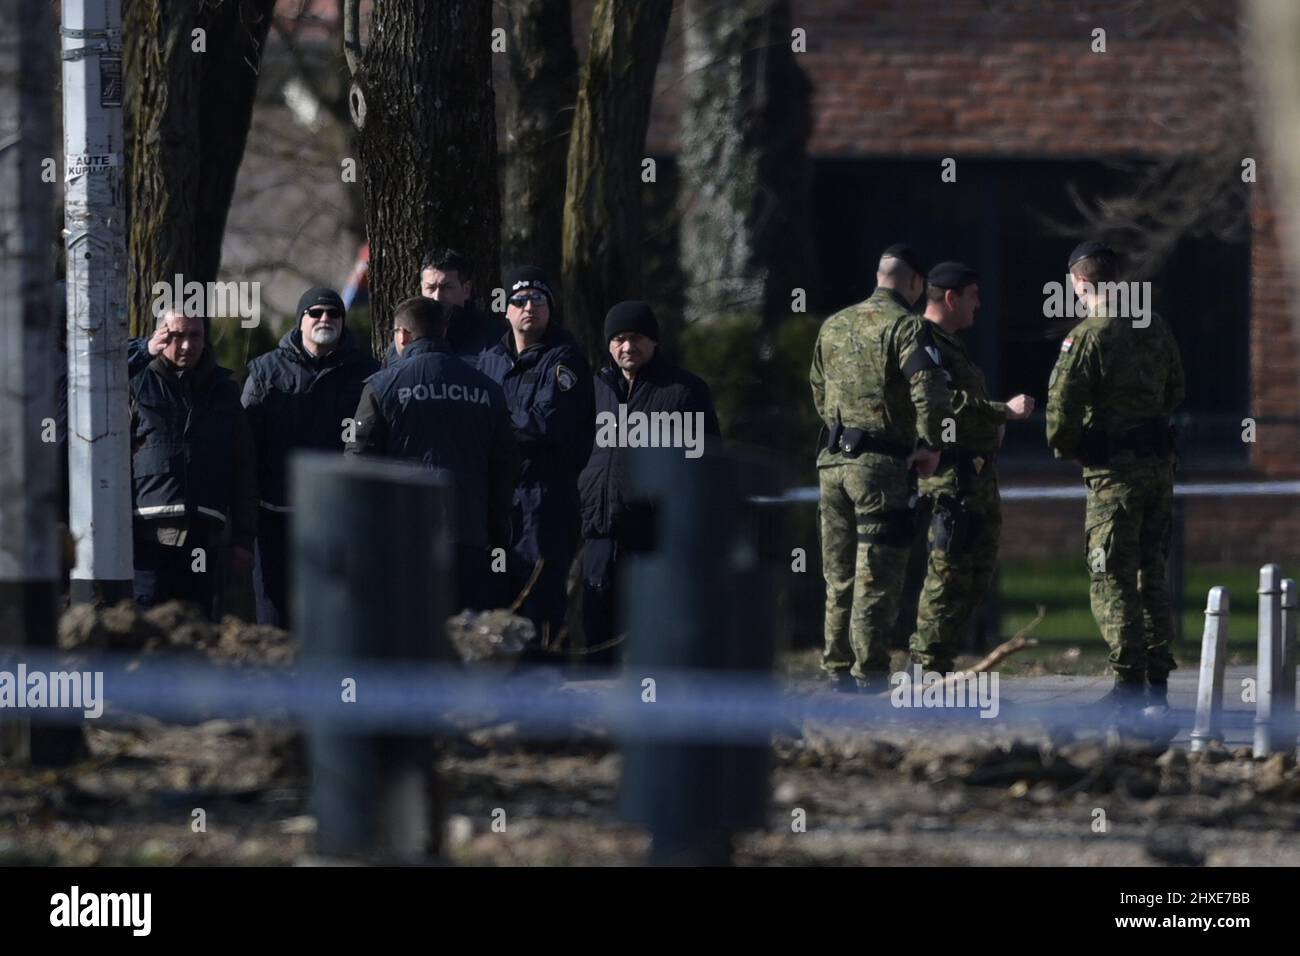 (220312) -- ZAGREB, March 12, 2022 (Xinhua) -- Police conduct an investigation in cooperation with military police after an unidentified military drone crashed in the area of Jaraun, Zagreb on March 10, 2022. An unmanned drone that crashed in the Jarun area of southwest Zagreb late Thursday is of military design and Russian-made, Croatian Prime Minister Andrej Plenkovic said on Friday. The Croatian government said on Friday that the drone had entered Croatian air space from Hungary. On the ground it caused a large crater and two parachutes were found in a wooded area. Some cars at the sce Stock Photo